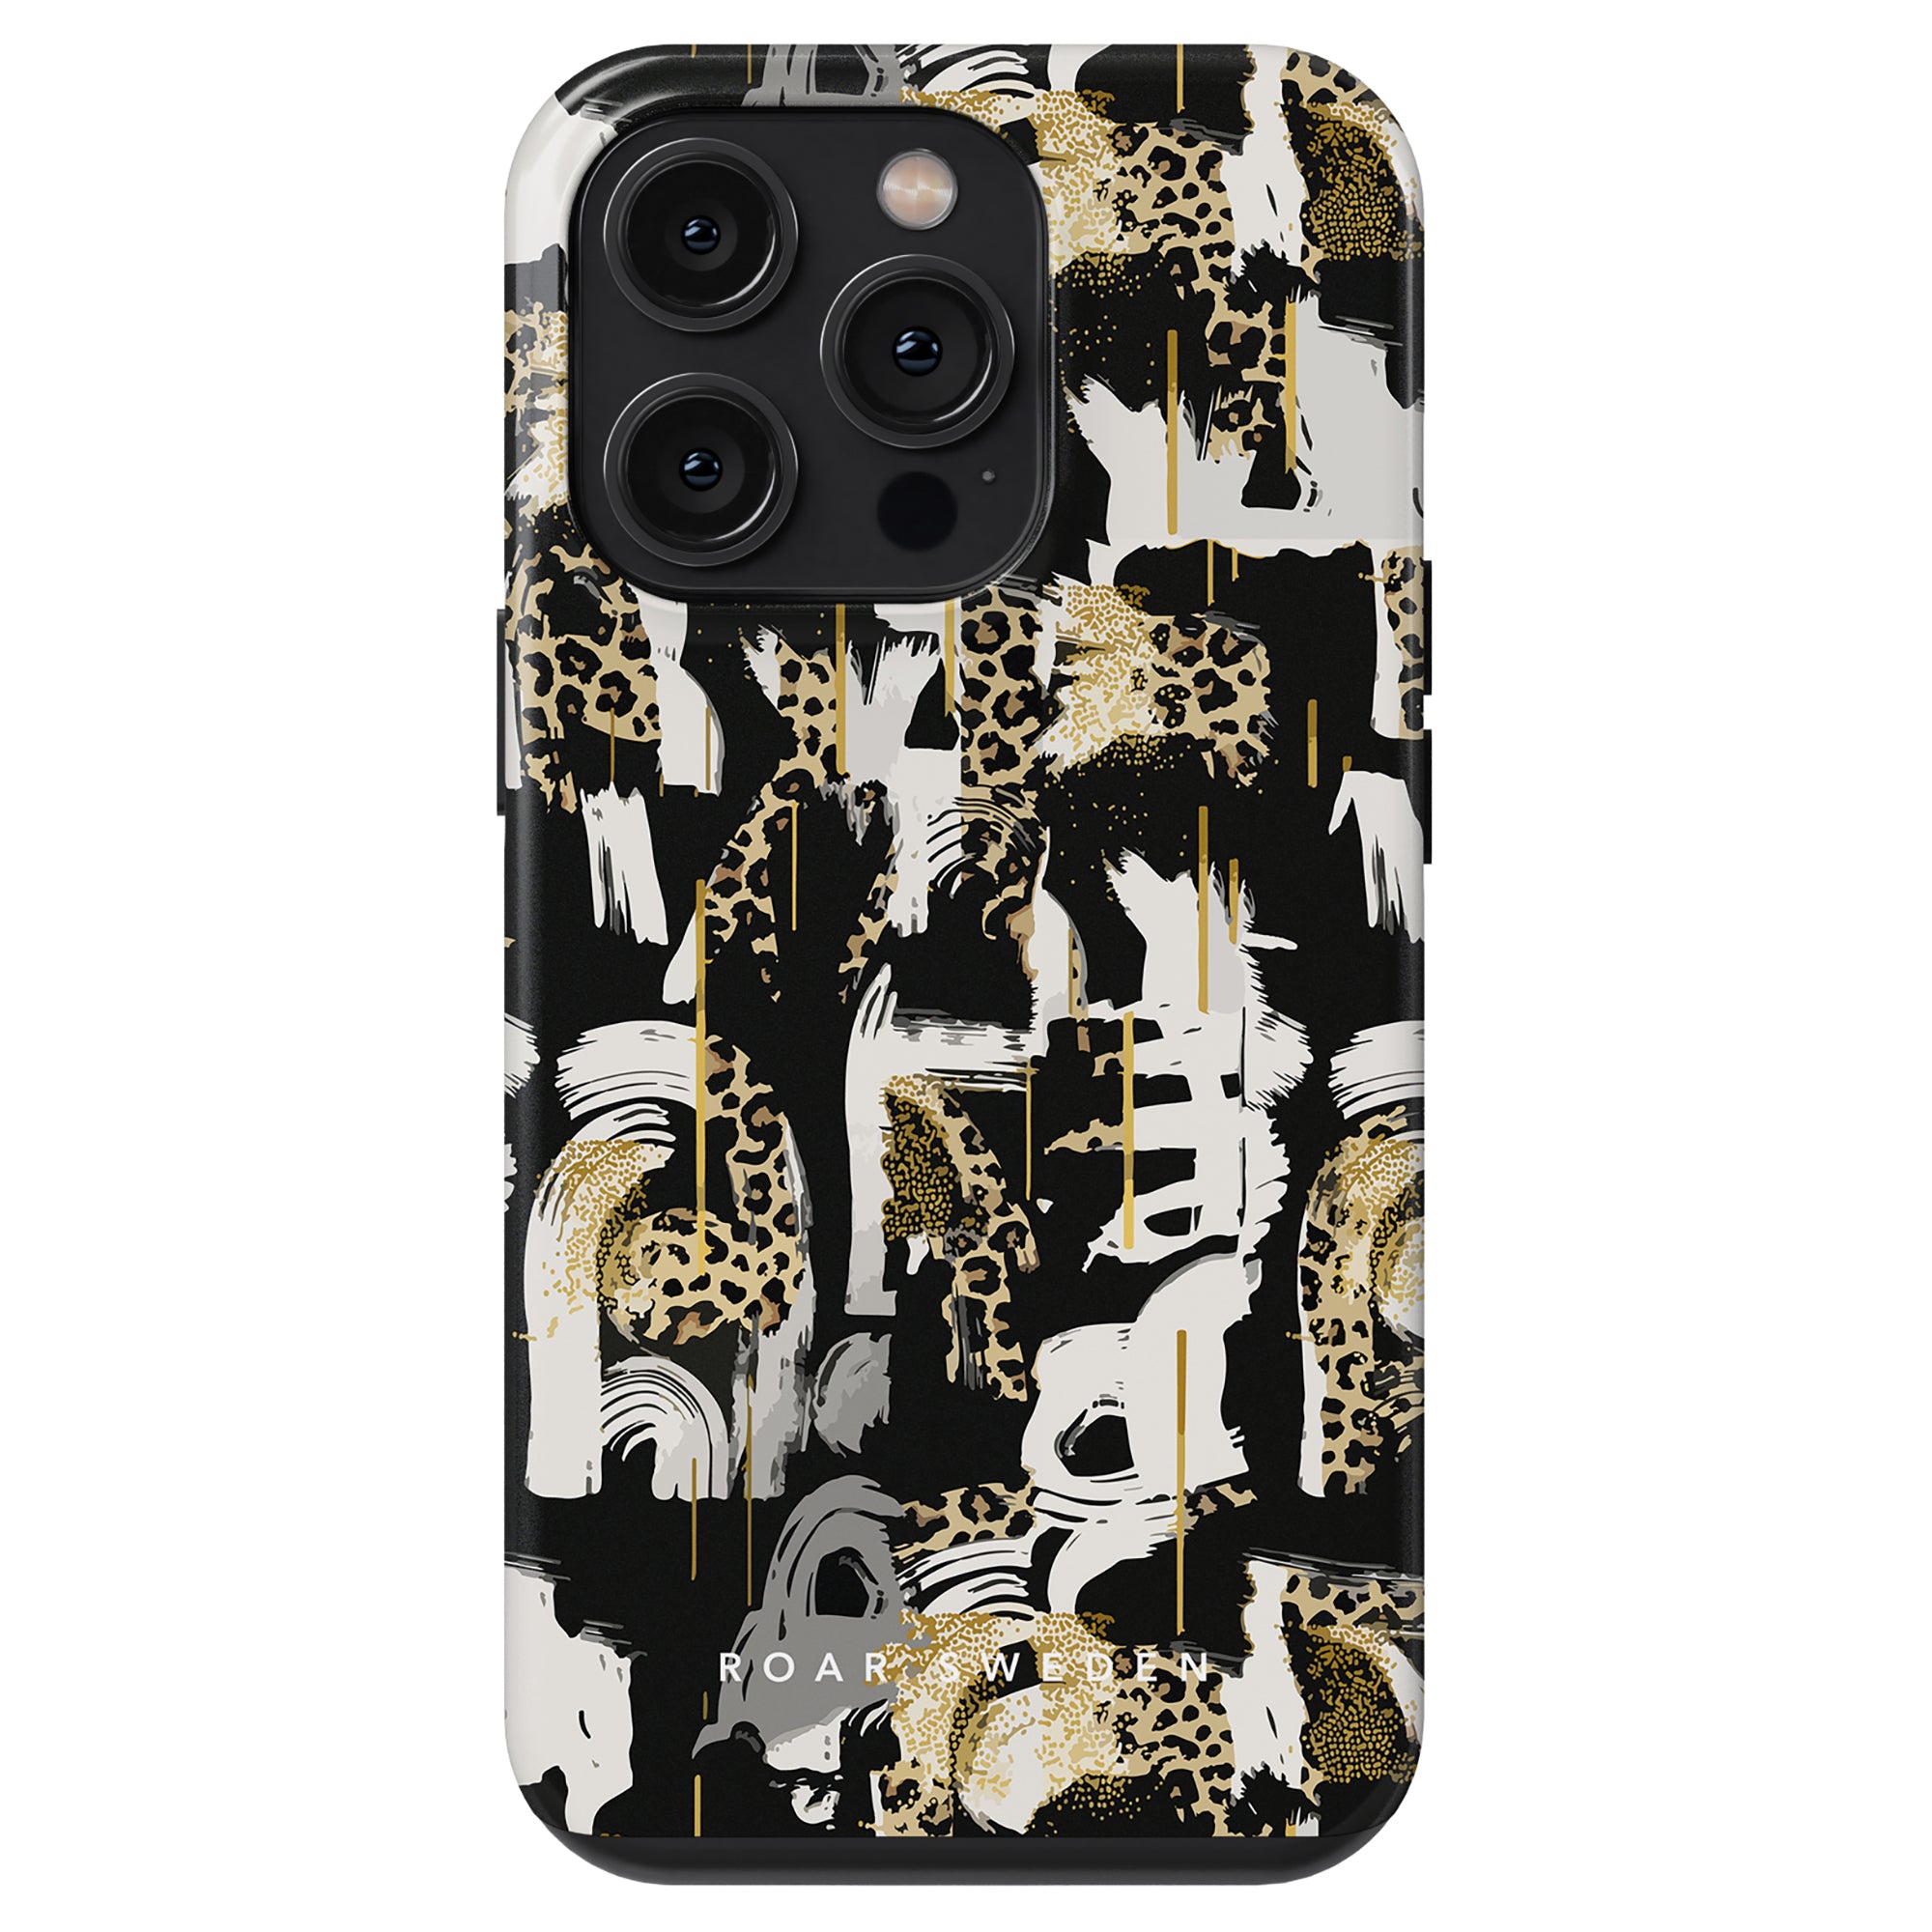 Skate Leo - Tough Case with abstract black, gold, and white pattern featuring leopard prints and paint strokes, labeled "roar wild".